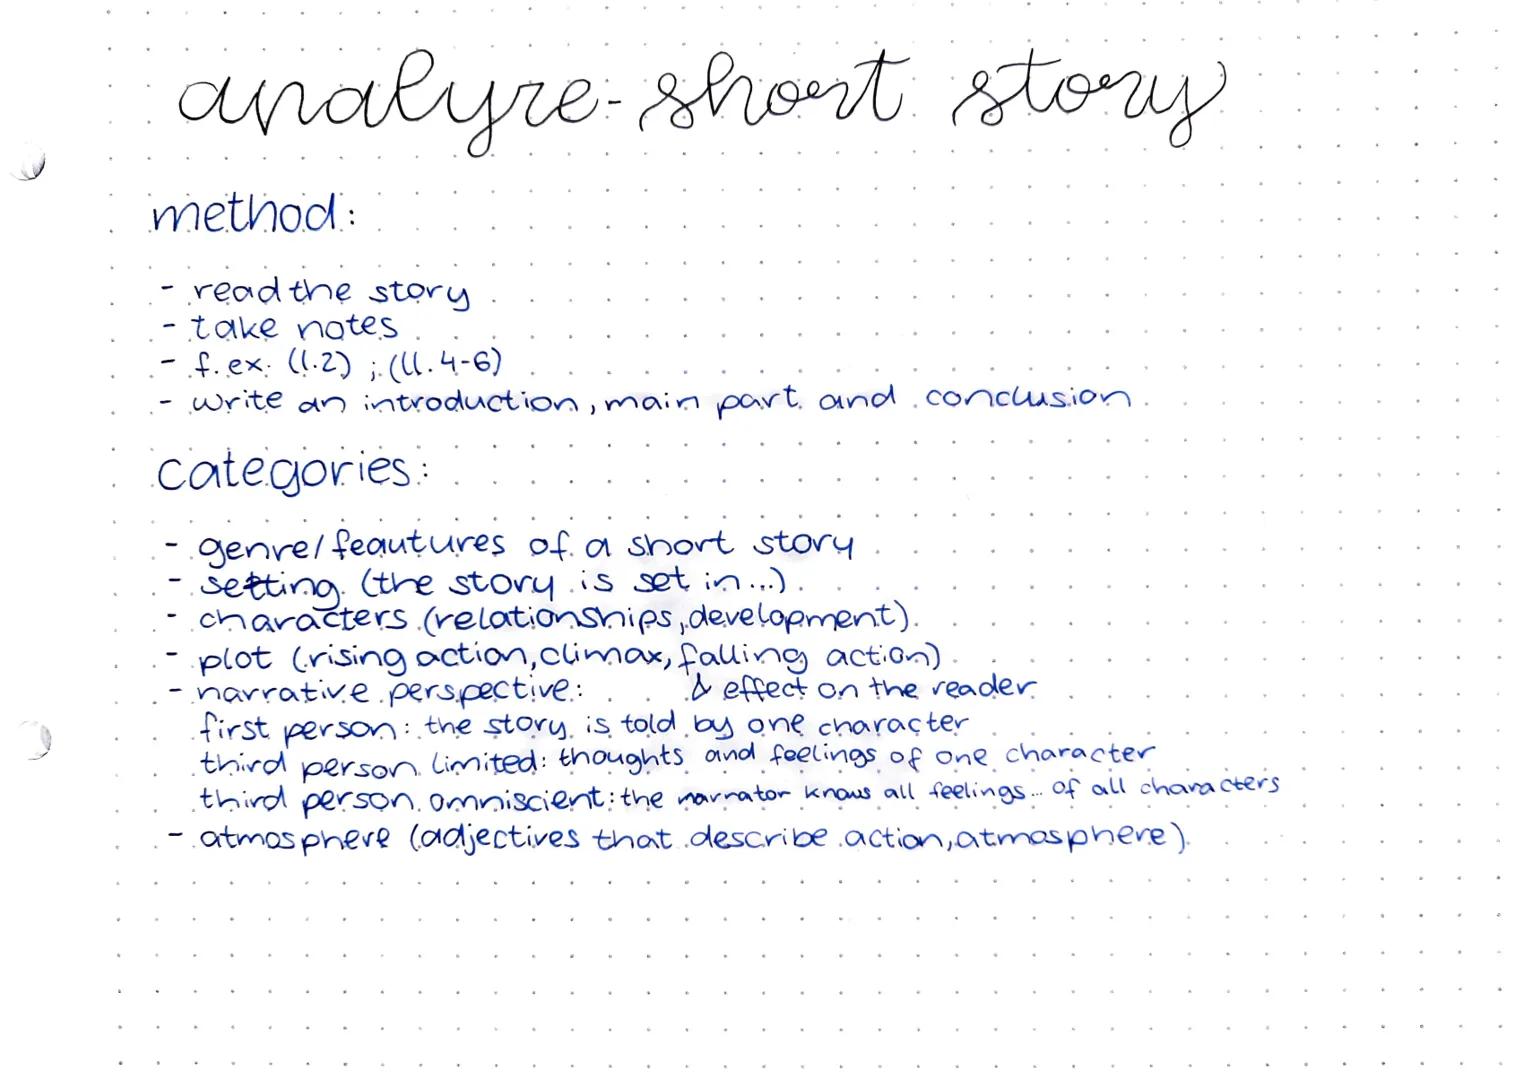 analyre short story
method:
read the story
take notes
- f.ex: (1.2); (11.4-6)
write an introduction, main part, and conclusion
categories:
g